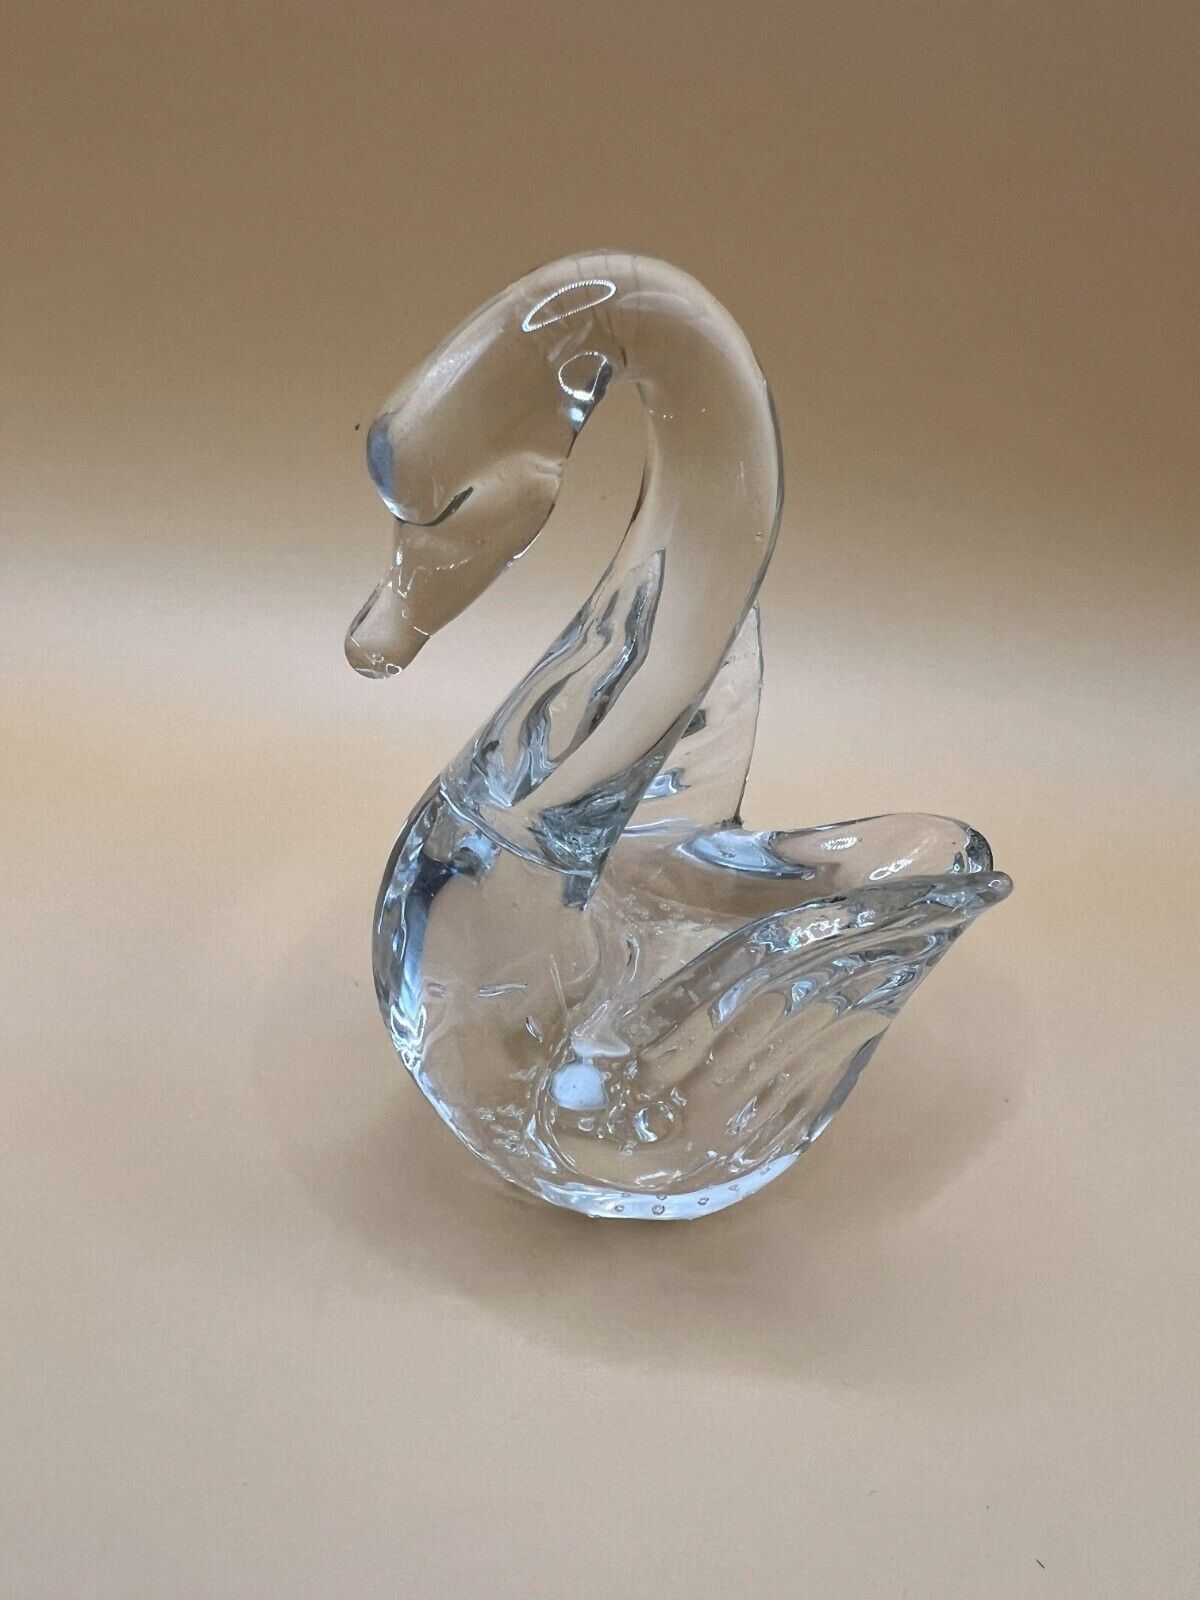 Vintage Art Glass Clear Swan Paperweight Figurine with Controlled Bubbles